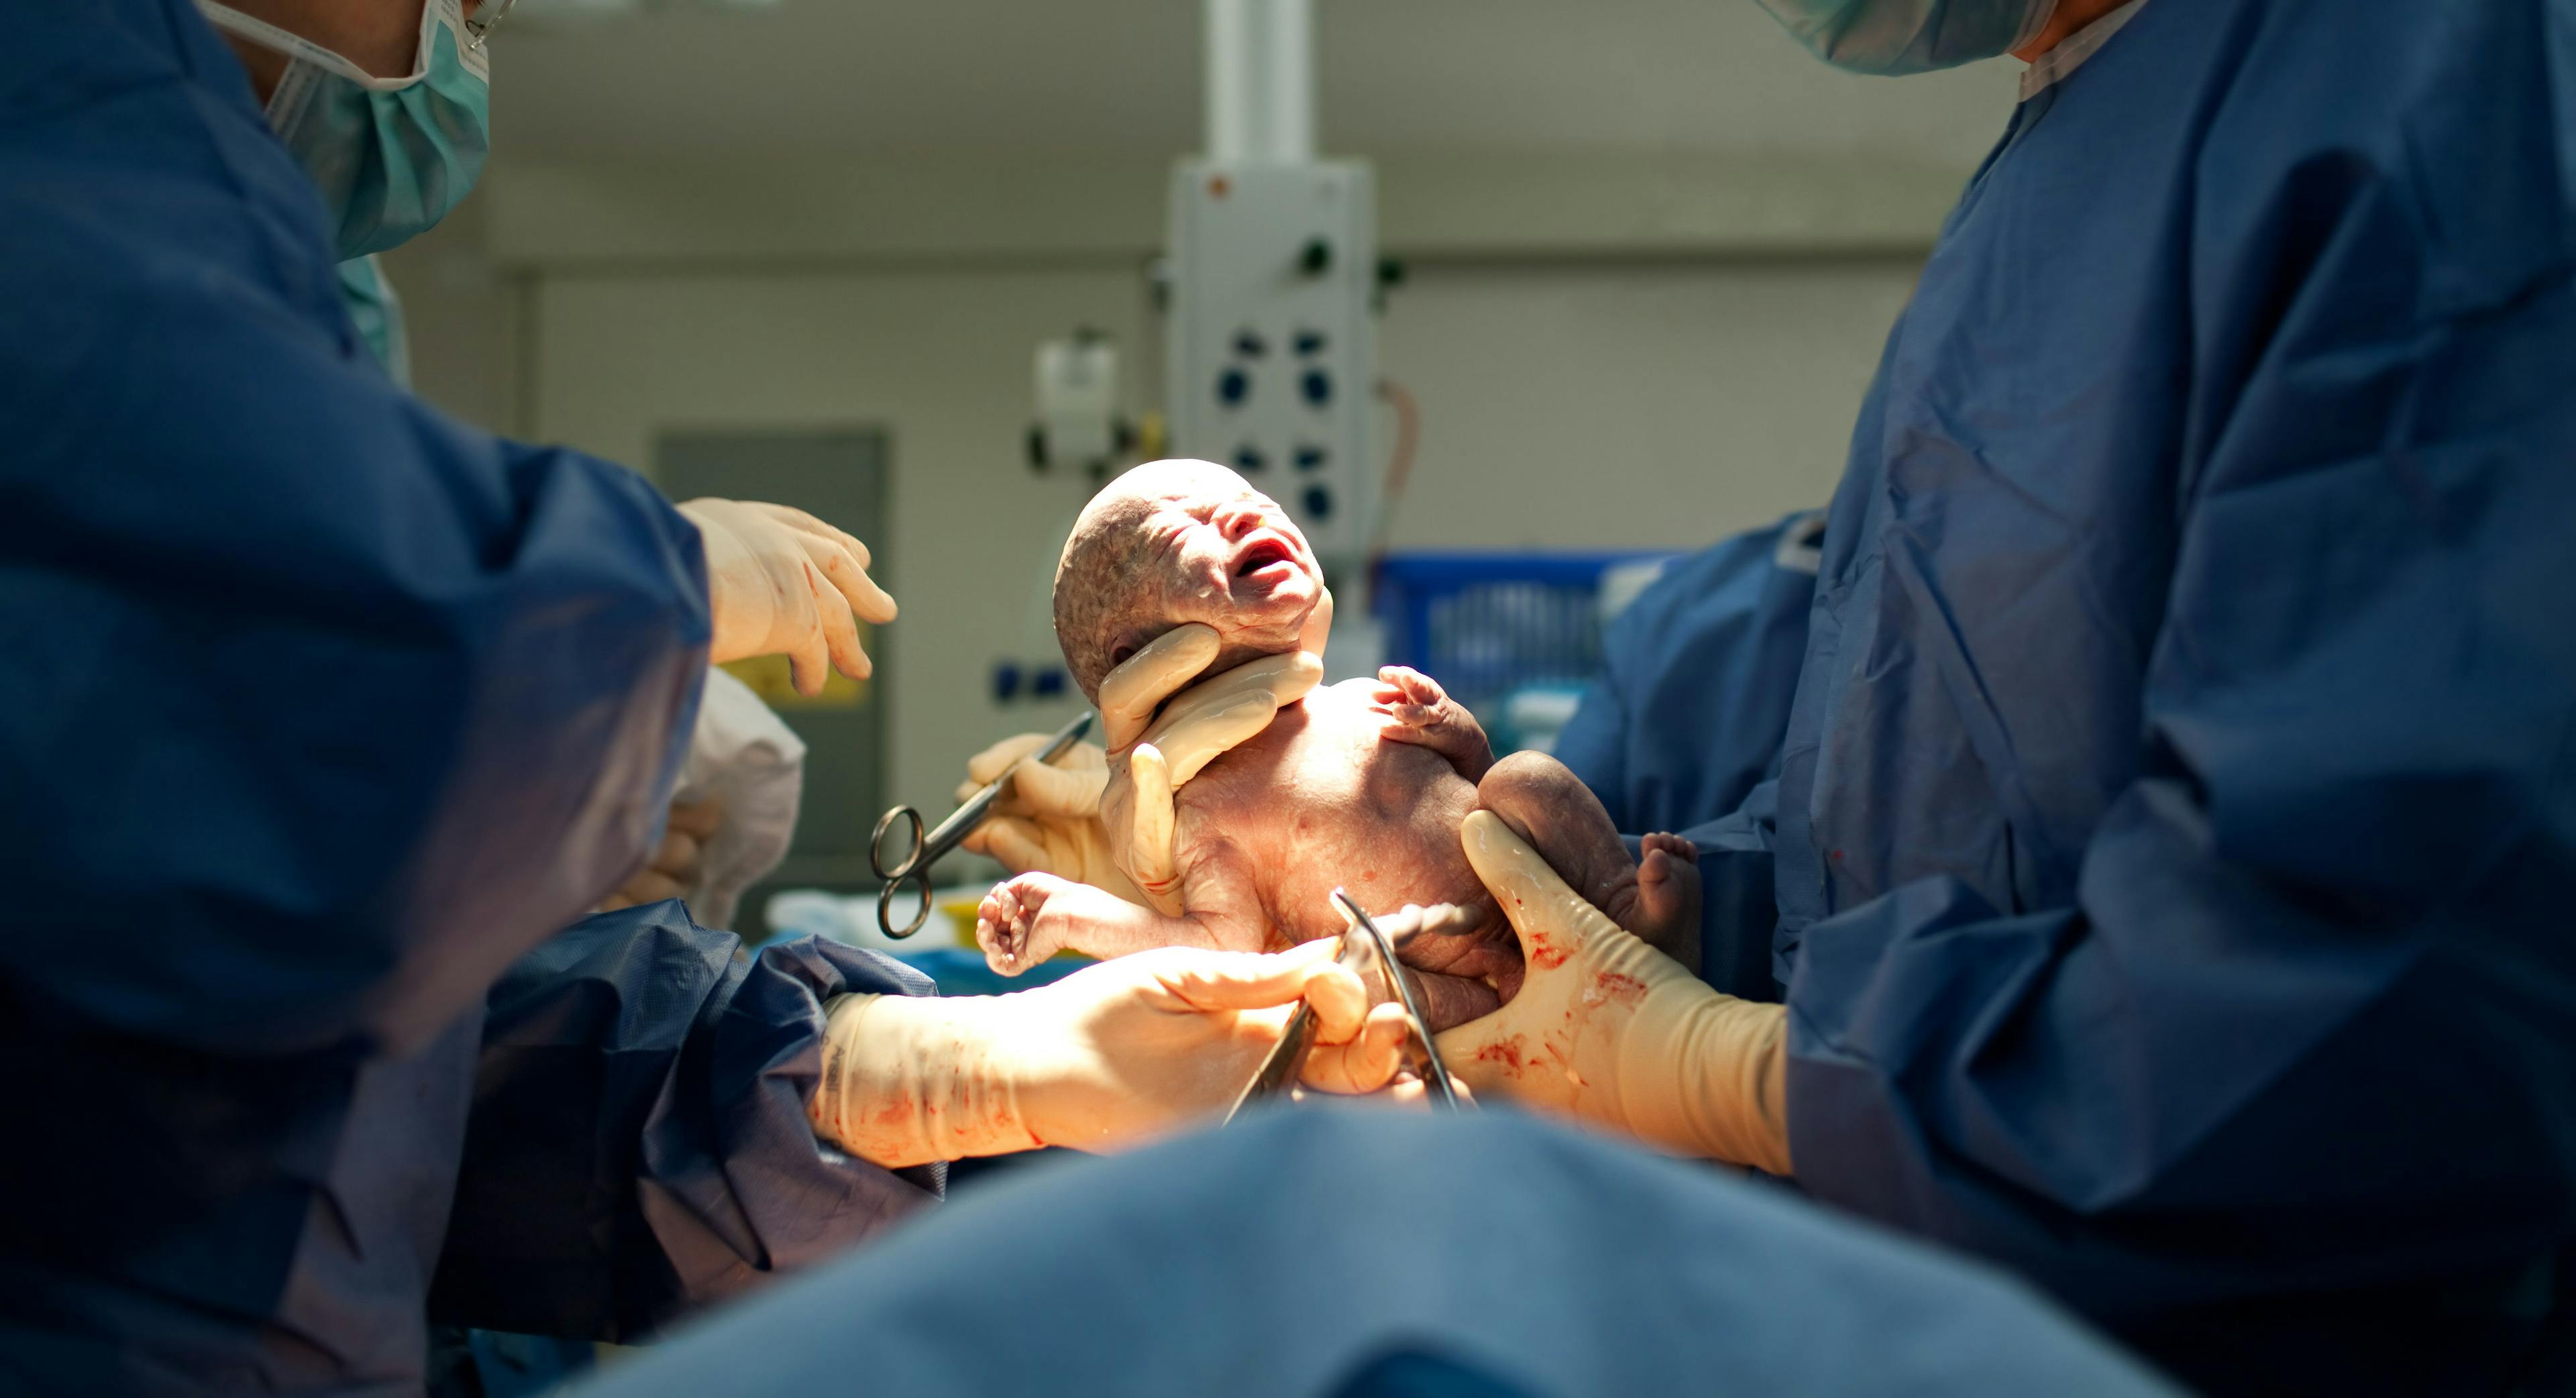 Evidence-based cesarean delivery guidelines